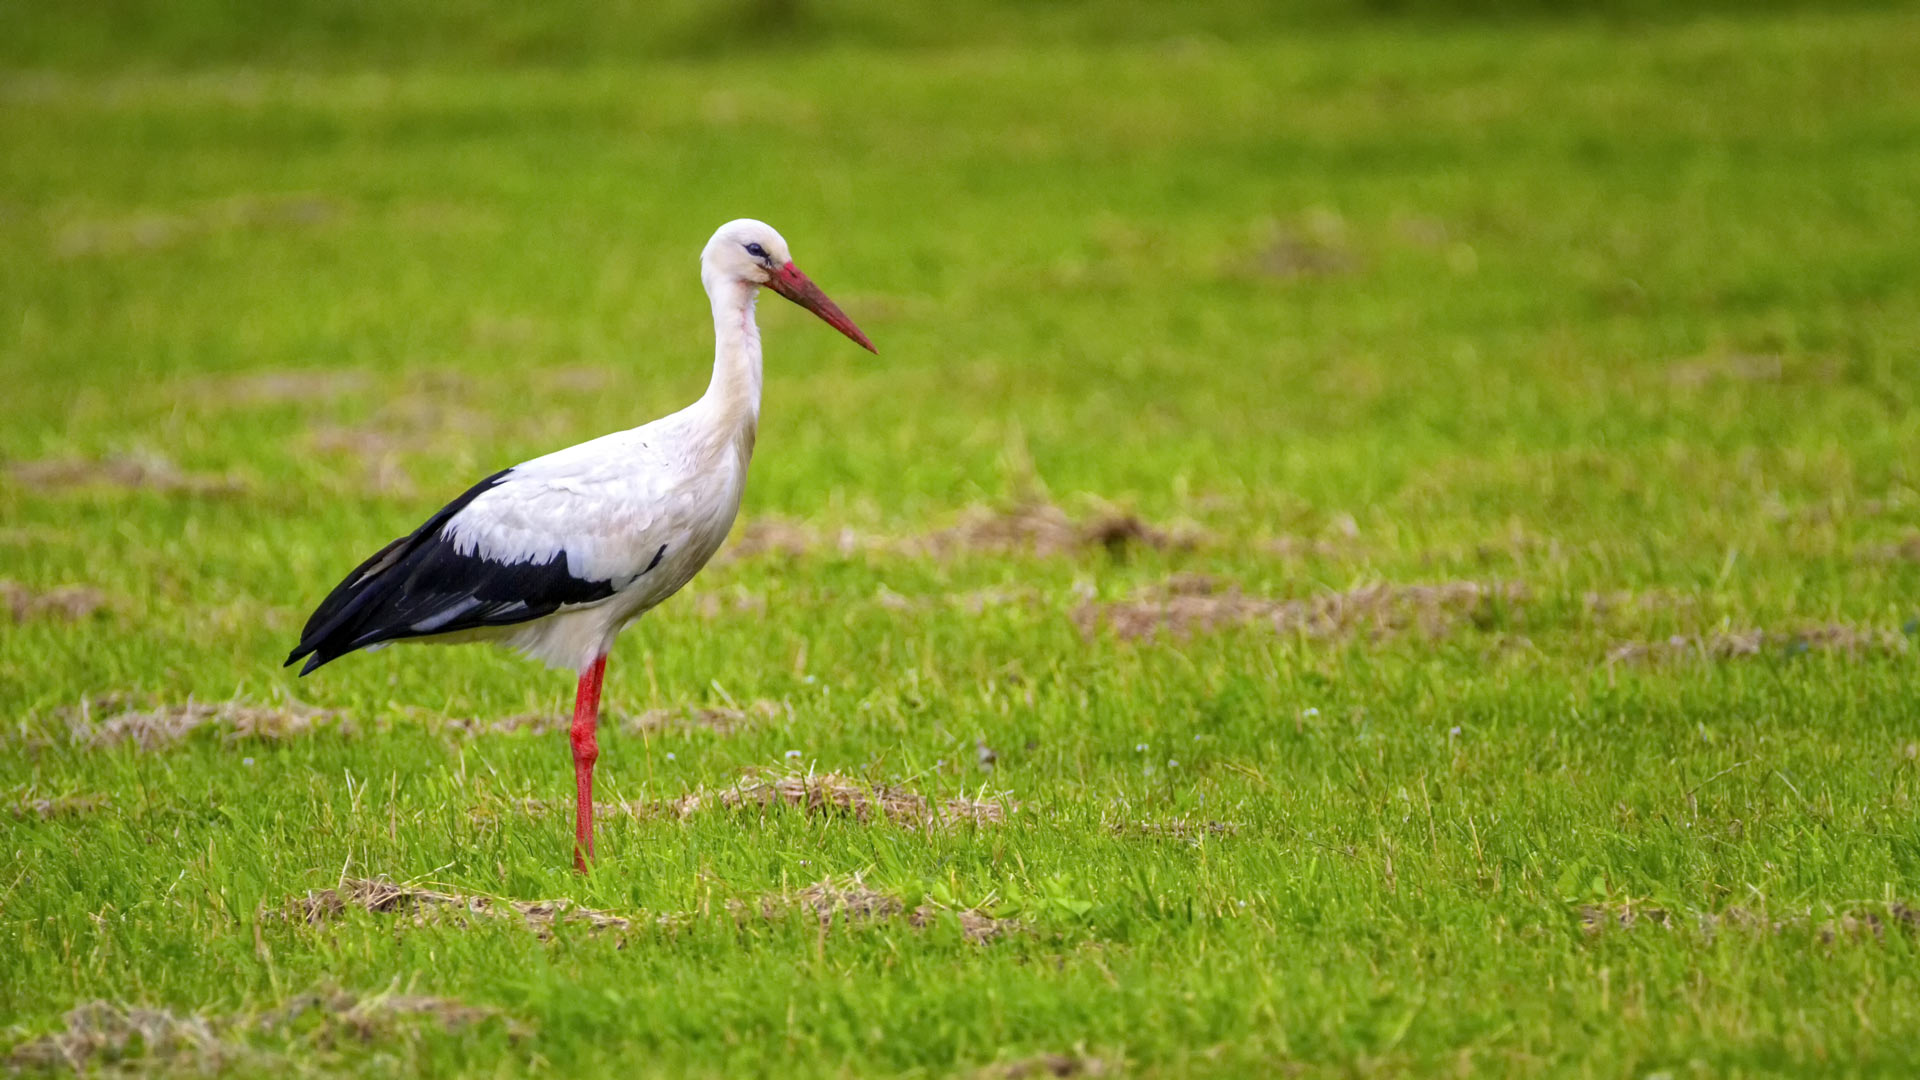 European white stork, ciconia, standing in a green meadow